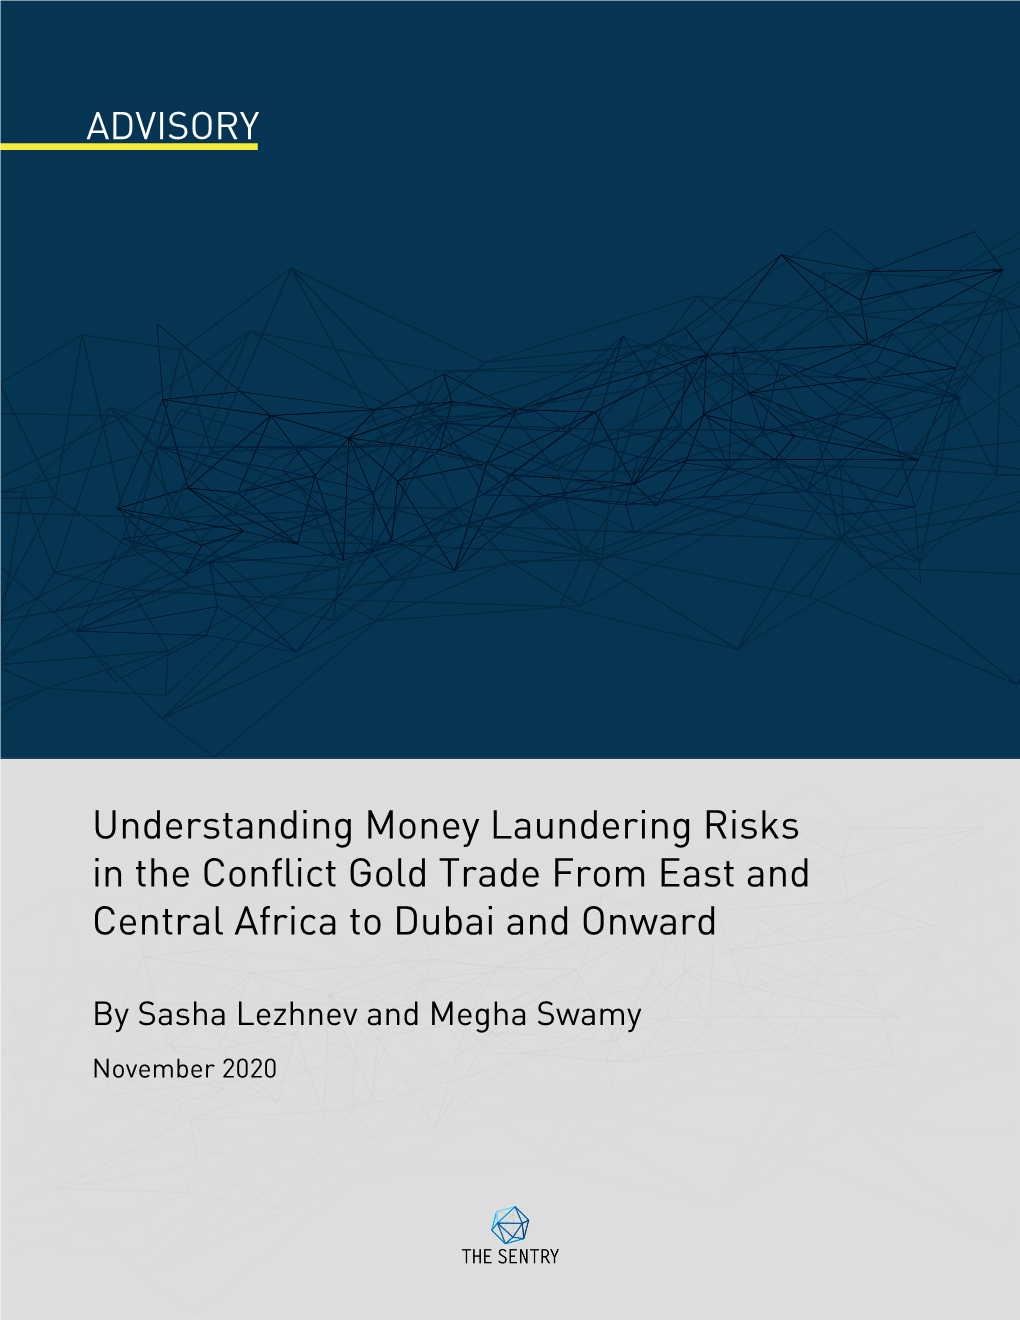 Understanding Money Laundering Risks in the Conflict Gold Trade from East and Central Africa to Dubai and Onward